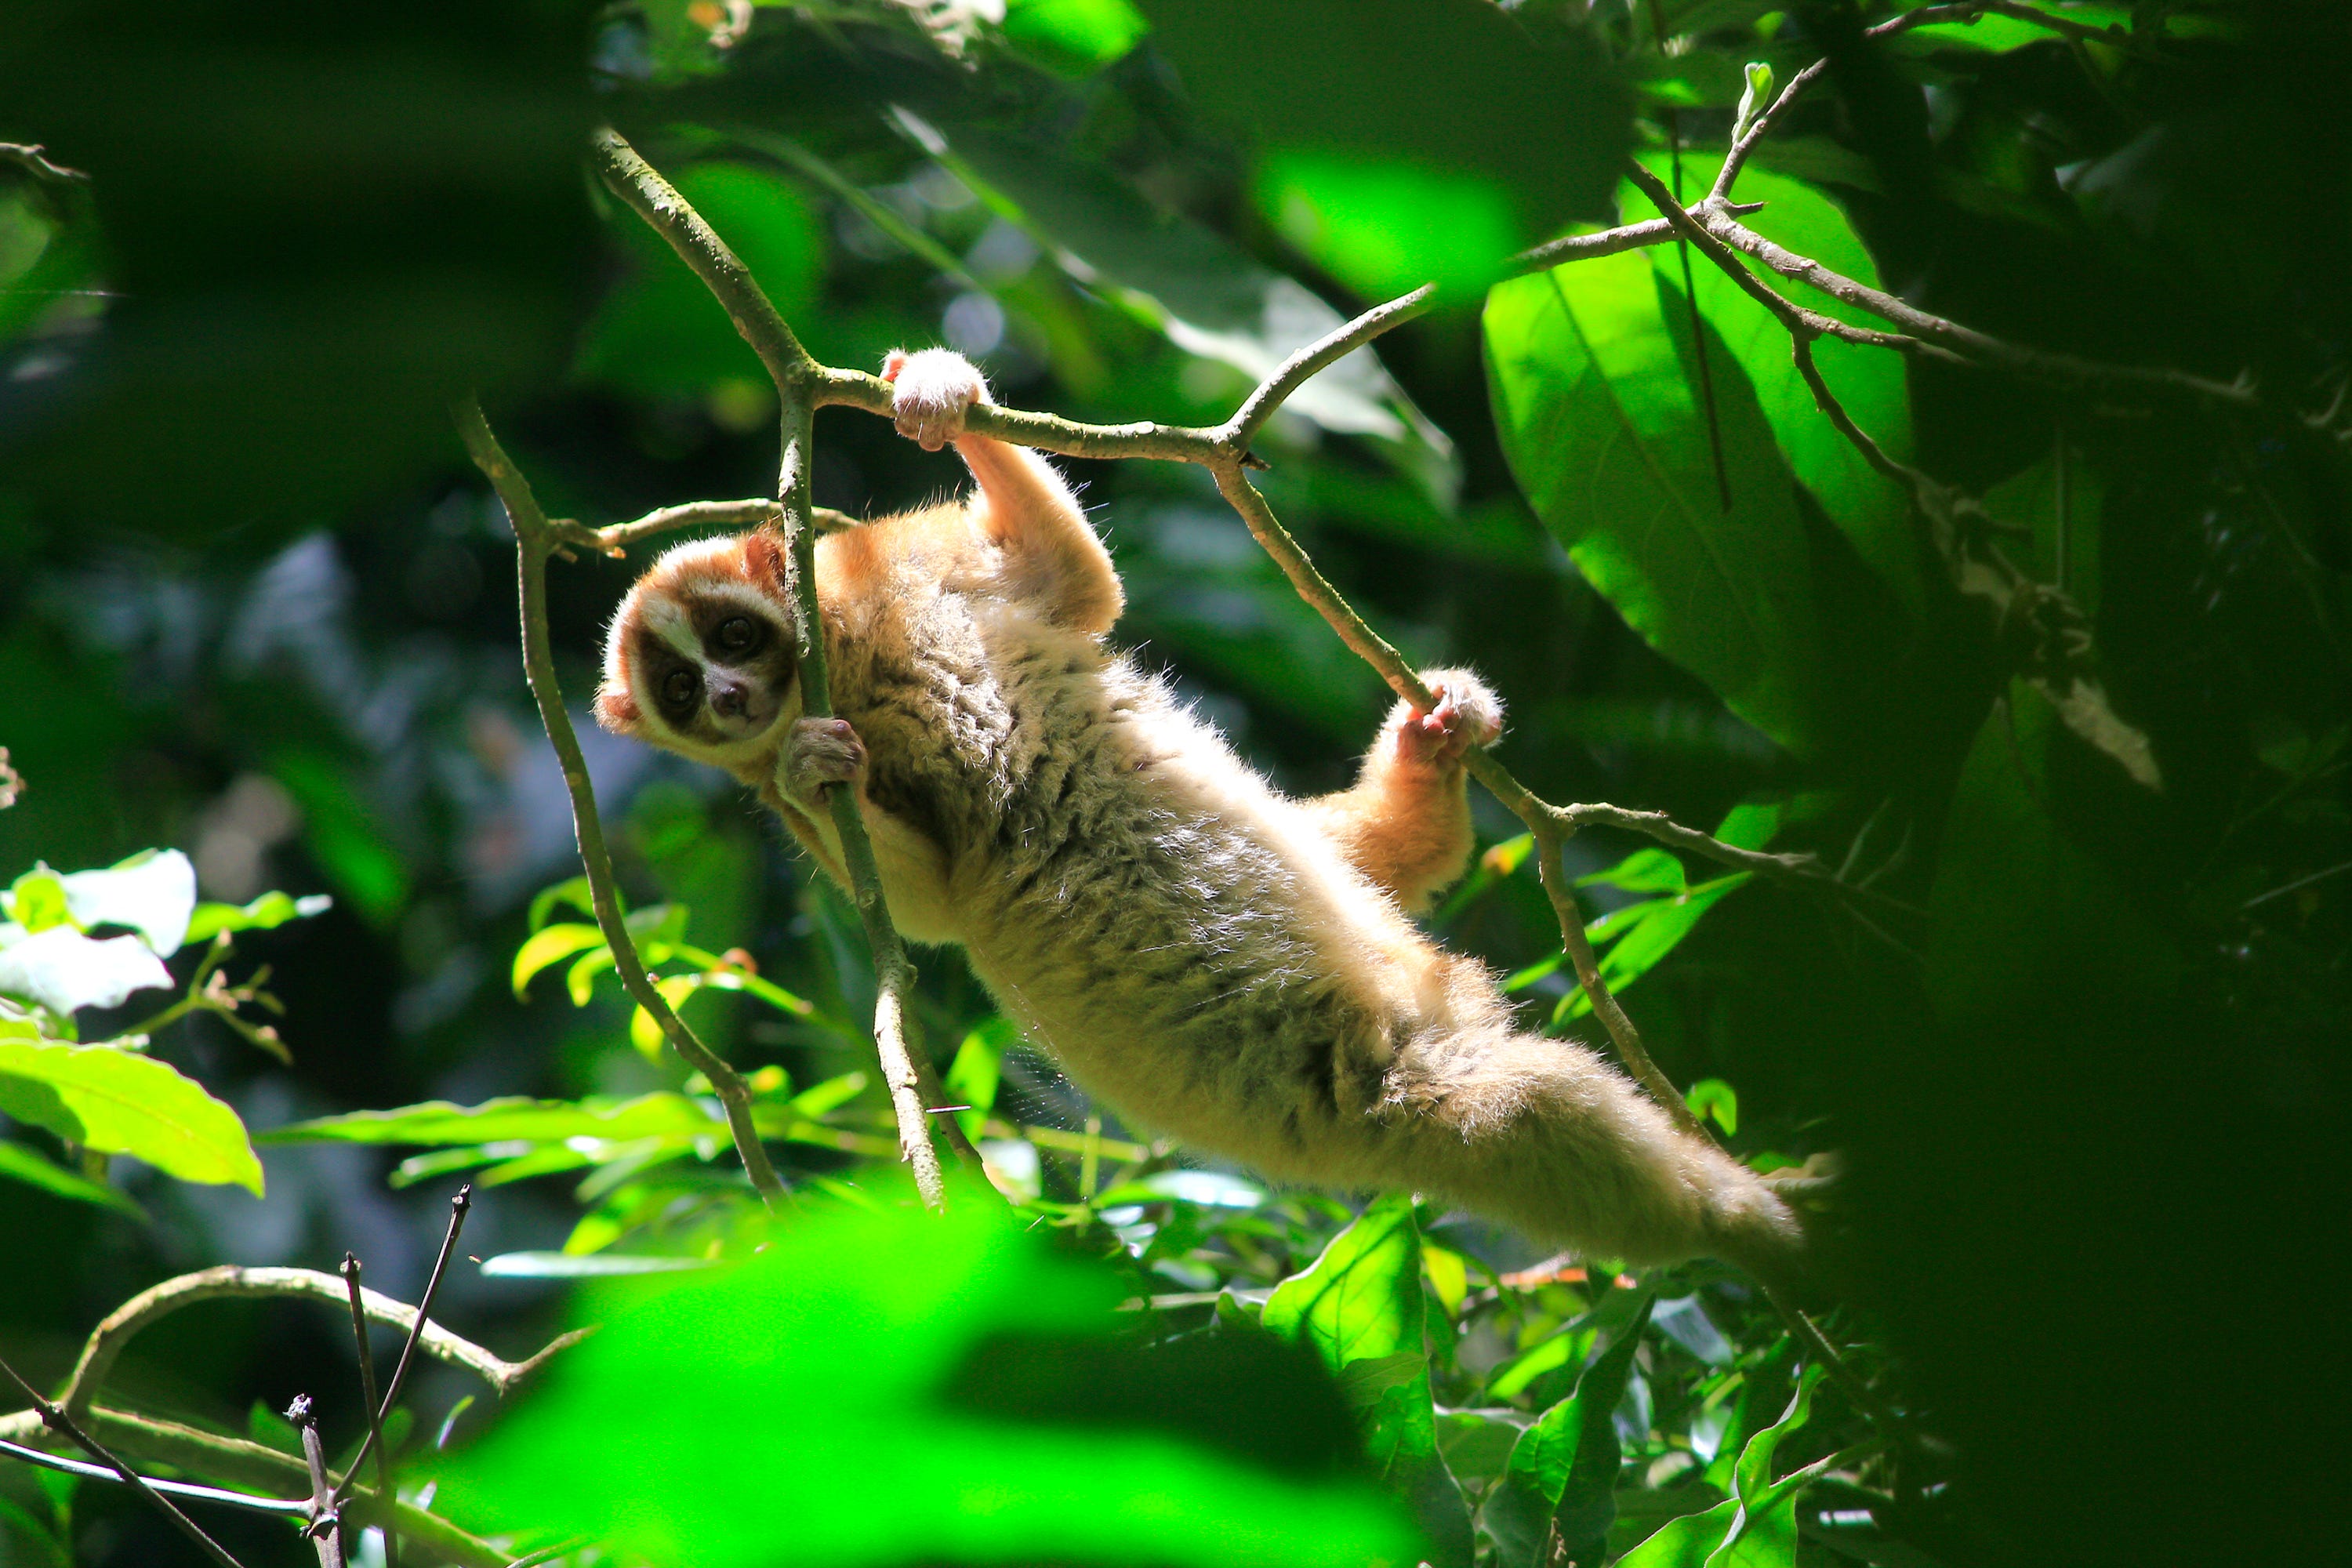 Javan slow loris climbing up the tree when released in a National Park of Mount Salak by International Animal Rescue (IAR) which have been confiscated from individuals or markets which illegally sell them as pets on December 20, 2016 in West Java, Indonesia.